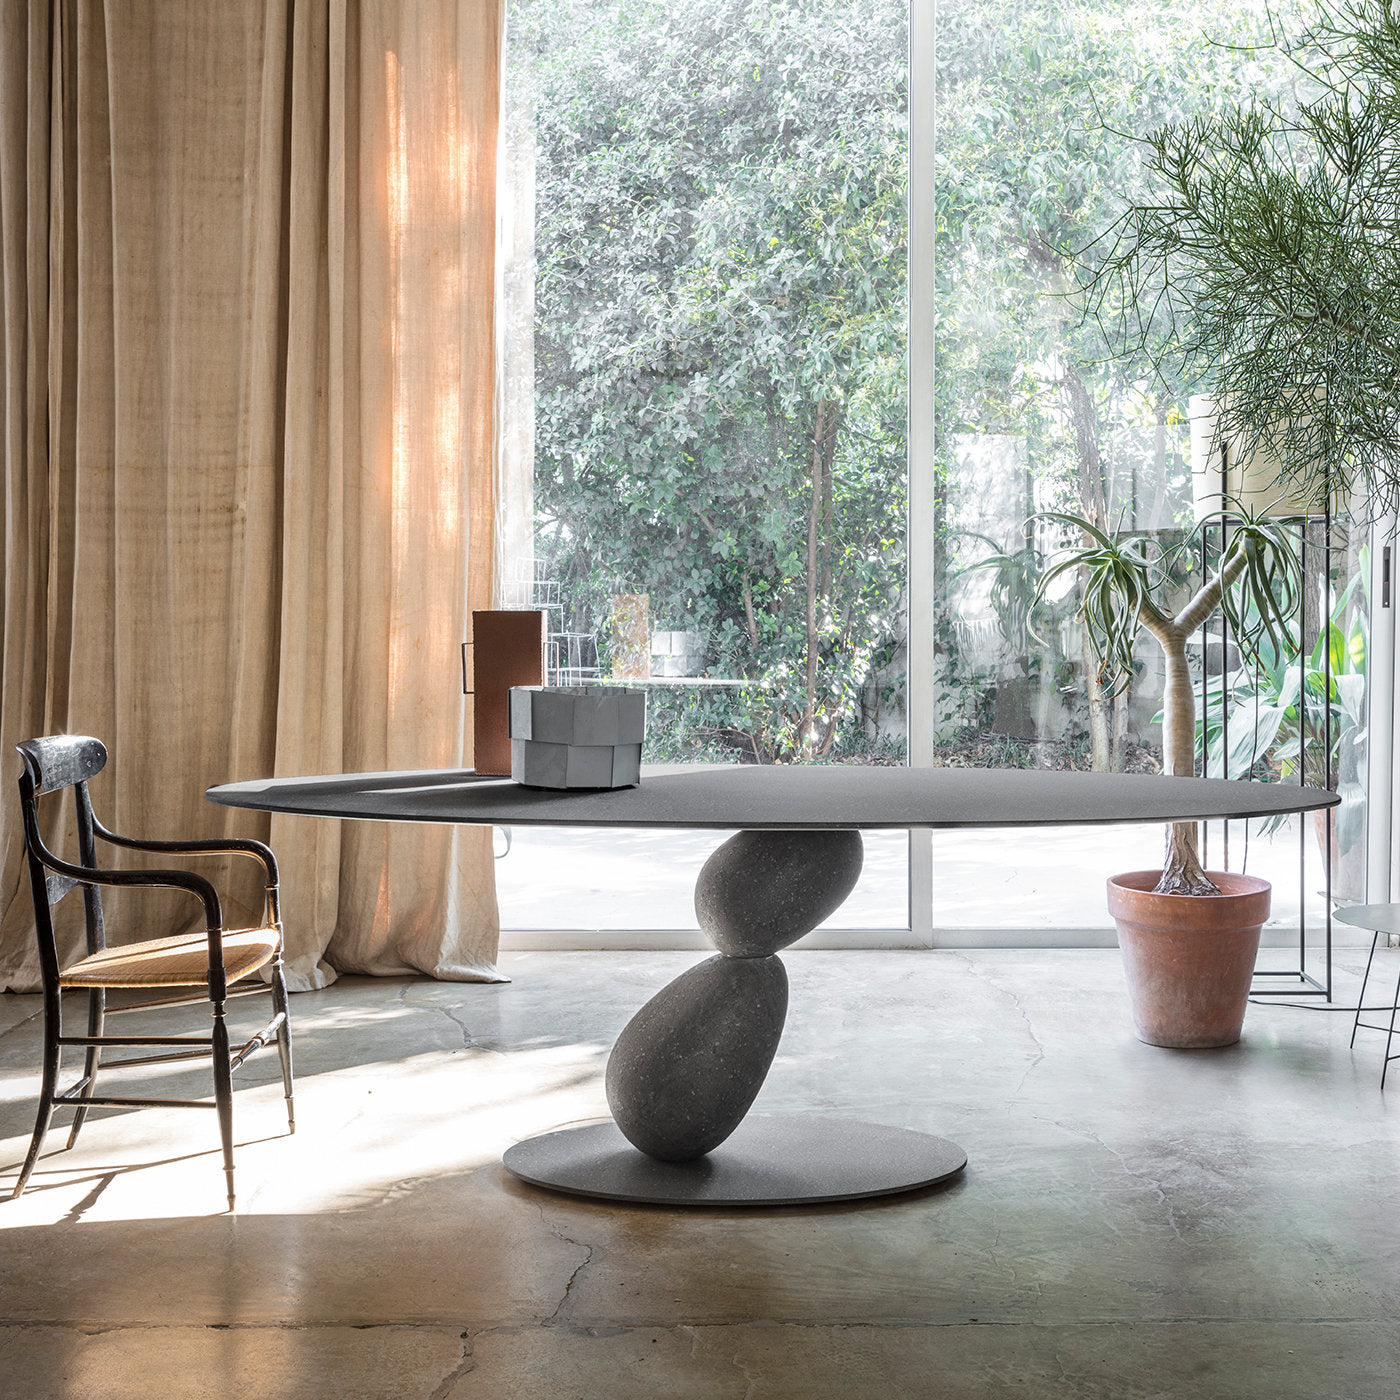 Matera Oval Dining Table by Sebastiano Tosi - Alternative view 1